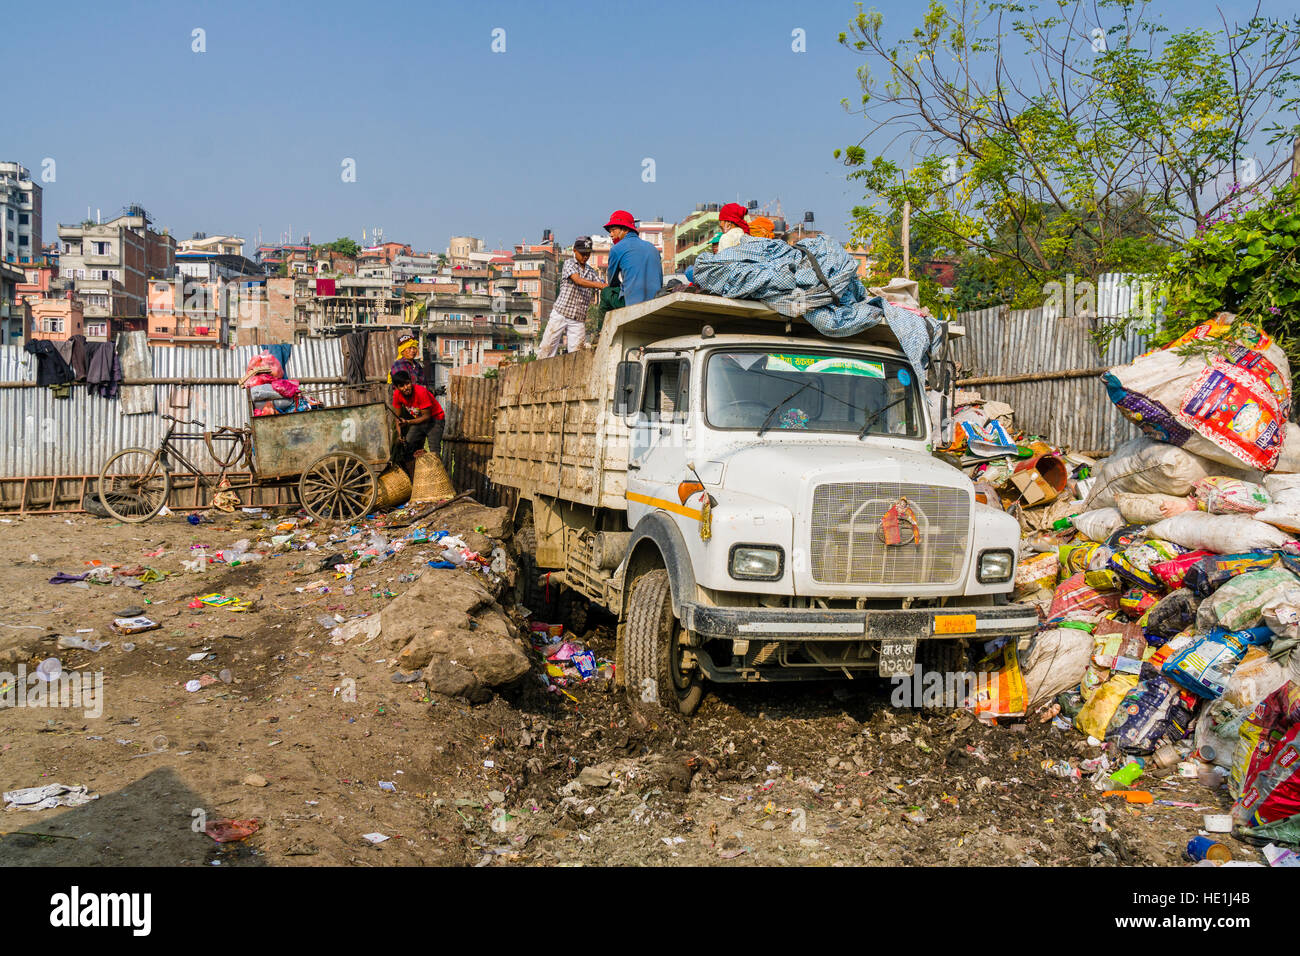 People are collecting garbage in the city, loading it on trucks and transporting it to a garbage dump outside the town Stock Photo